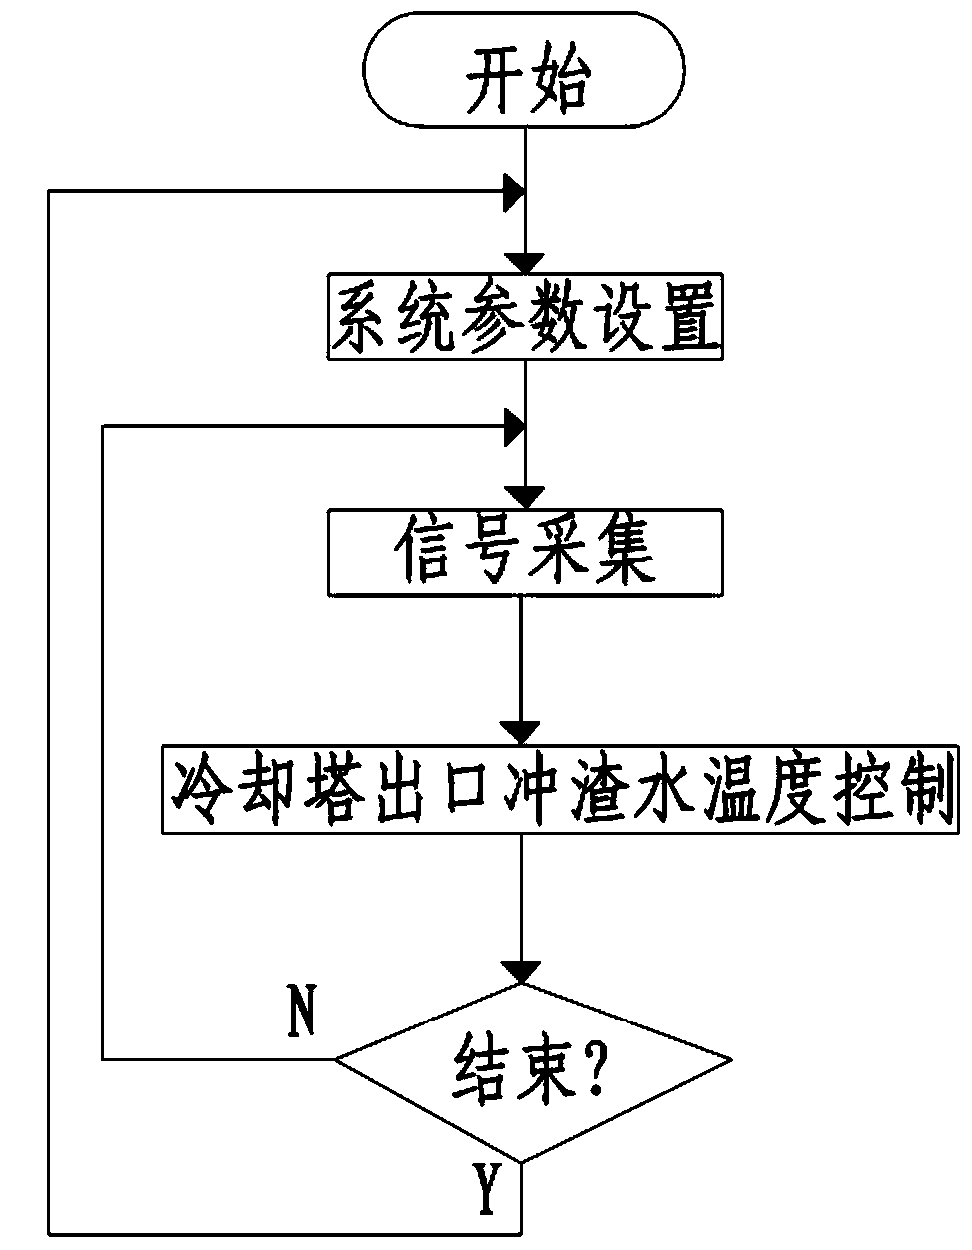 Method for controlling temperature of slag flushing water at cooling tower outlet in blast furnace slag treating system